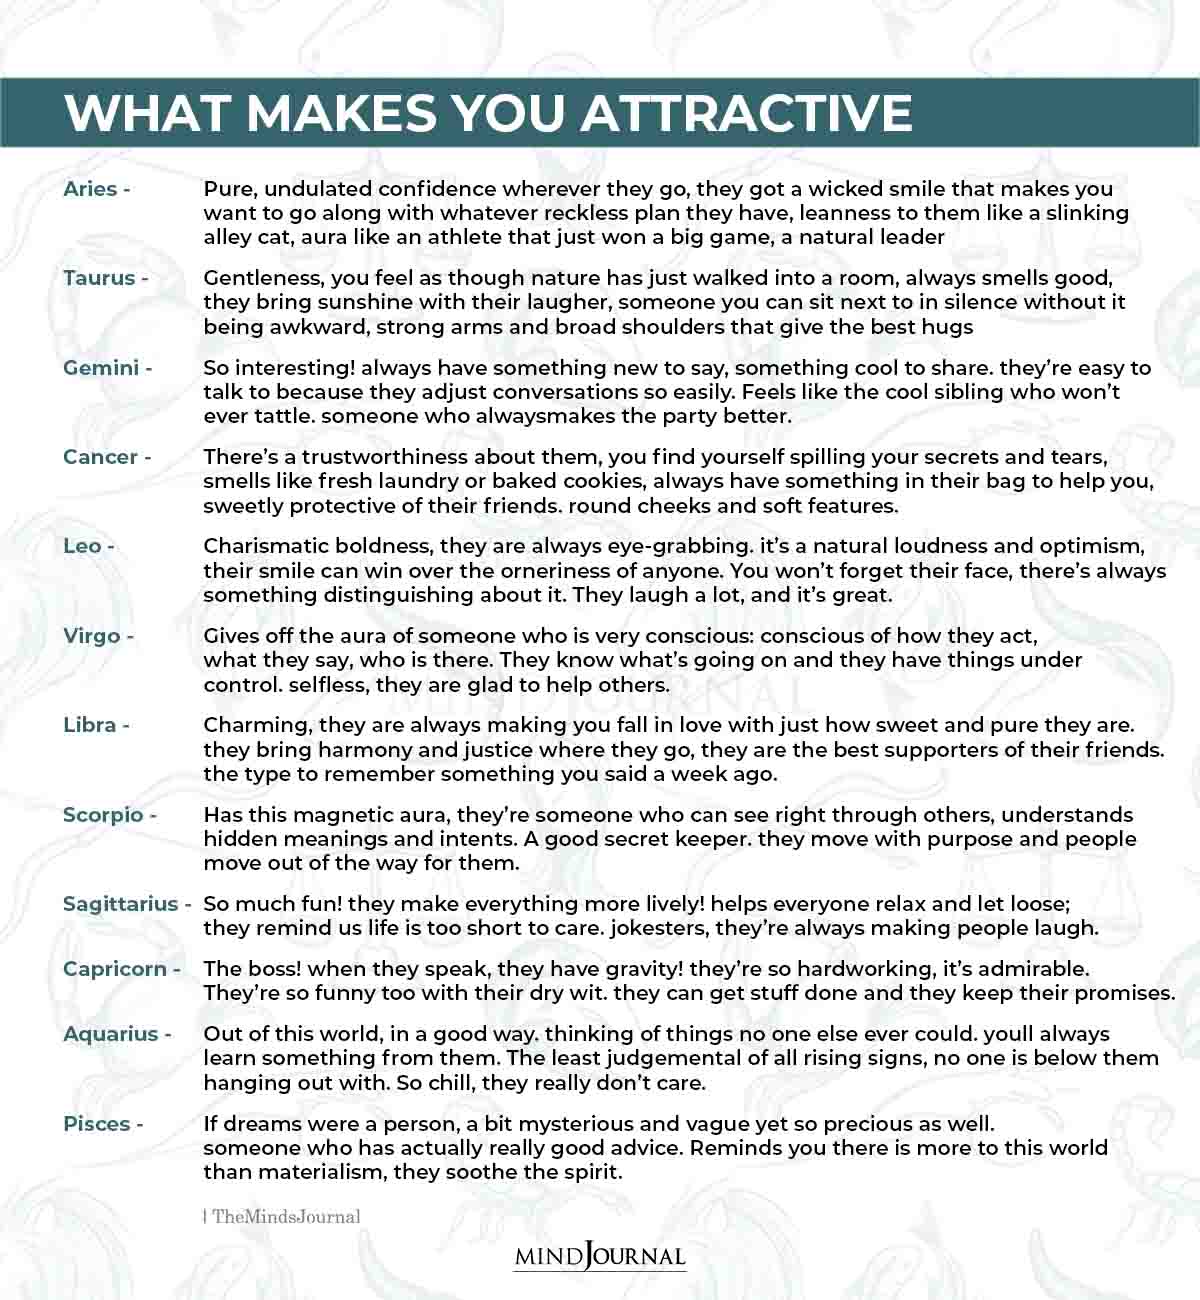 Why Each Rising Sign Is Attractive